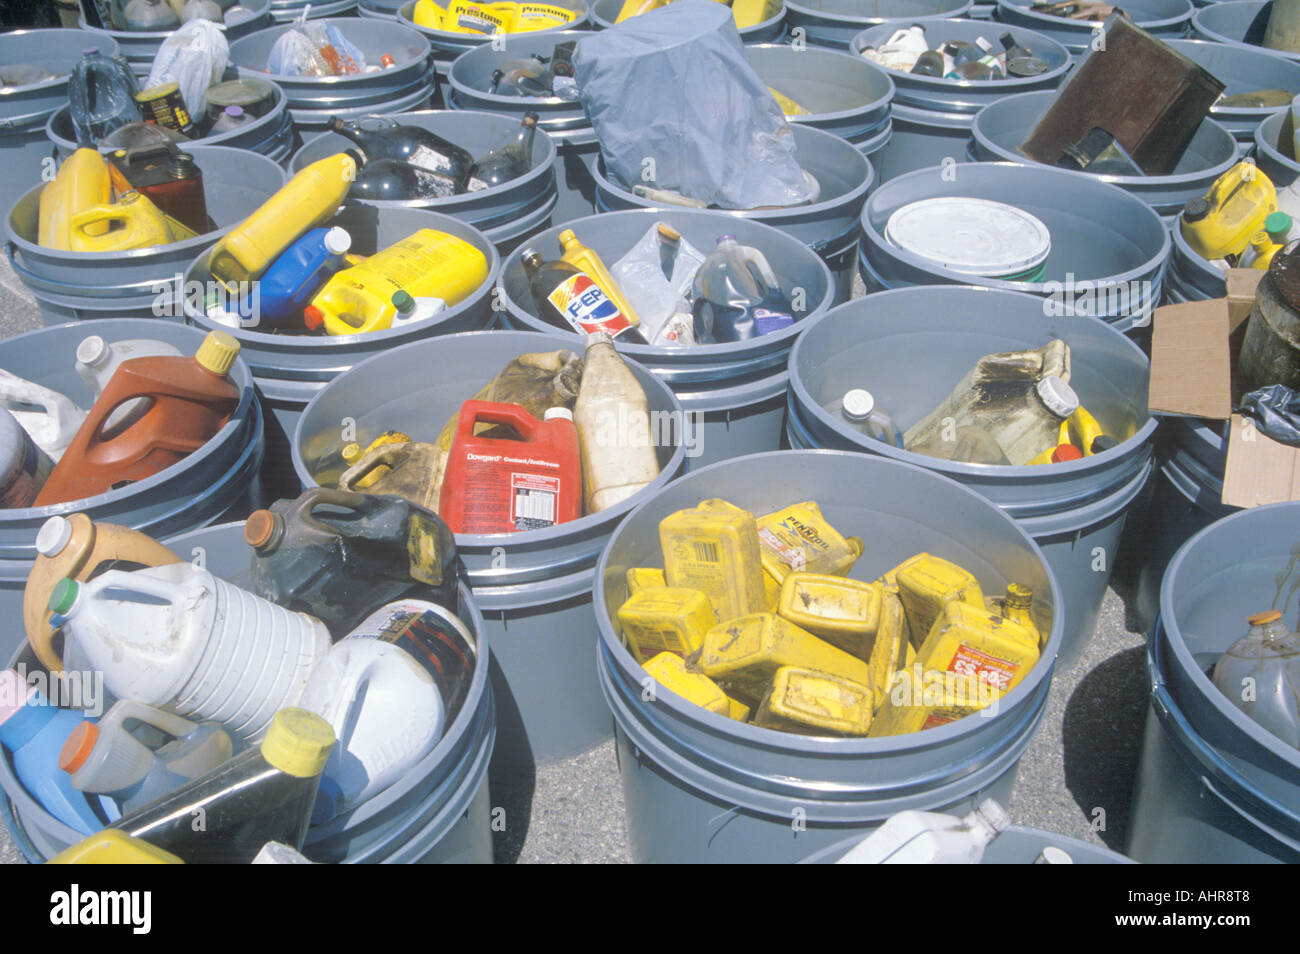 Plastic Buckets and Pails for Hazardous Waste Material Disposal at